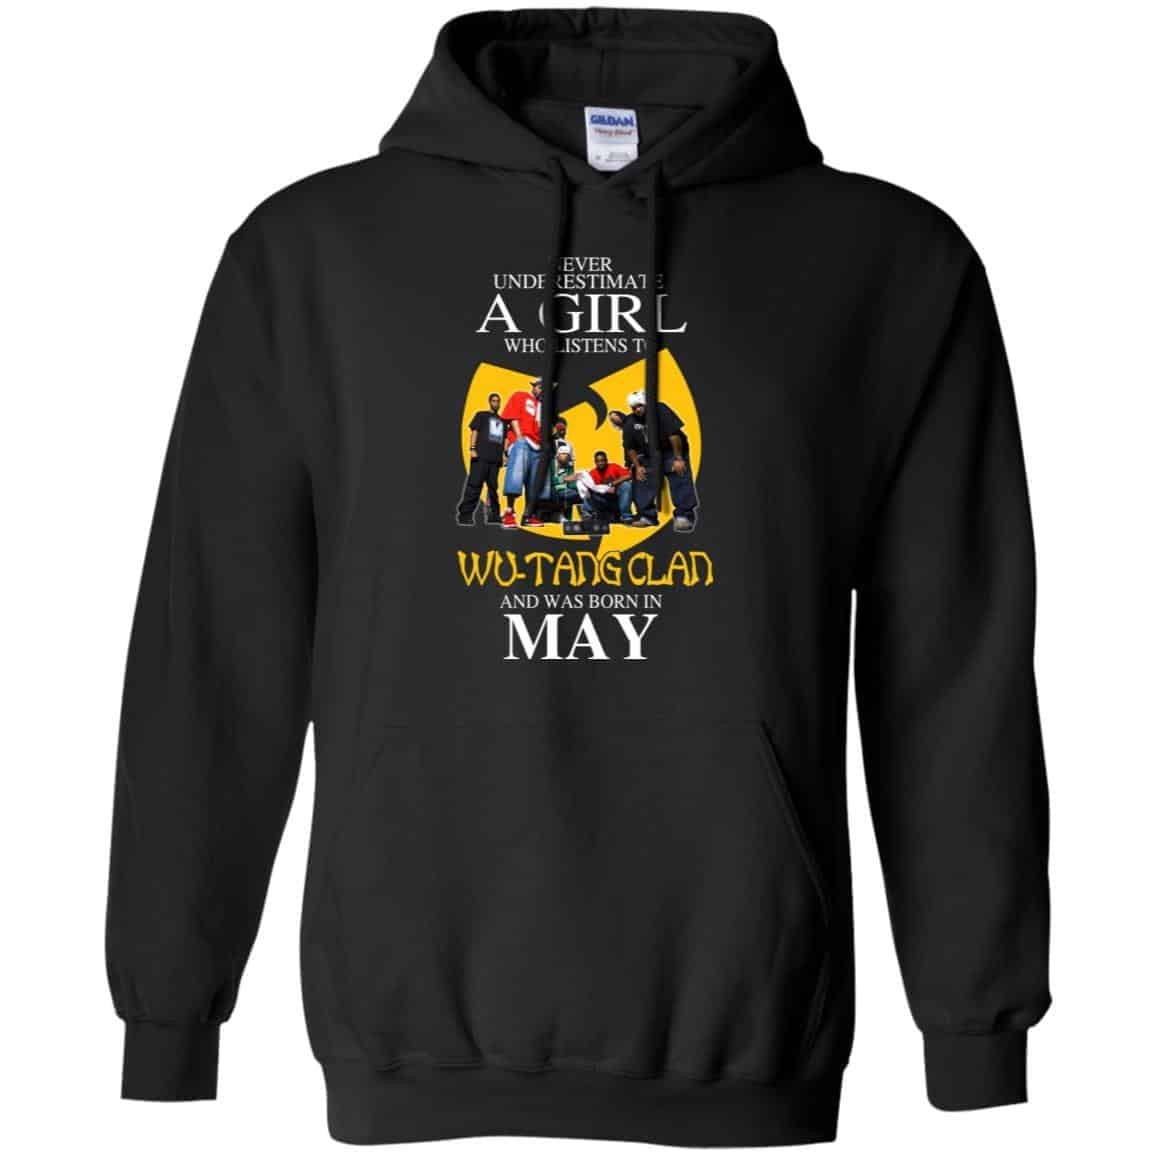 A Girl Who Listens To Wu Tang Clan And Was Born In May T Shirts Hoodie Birthday Gift